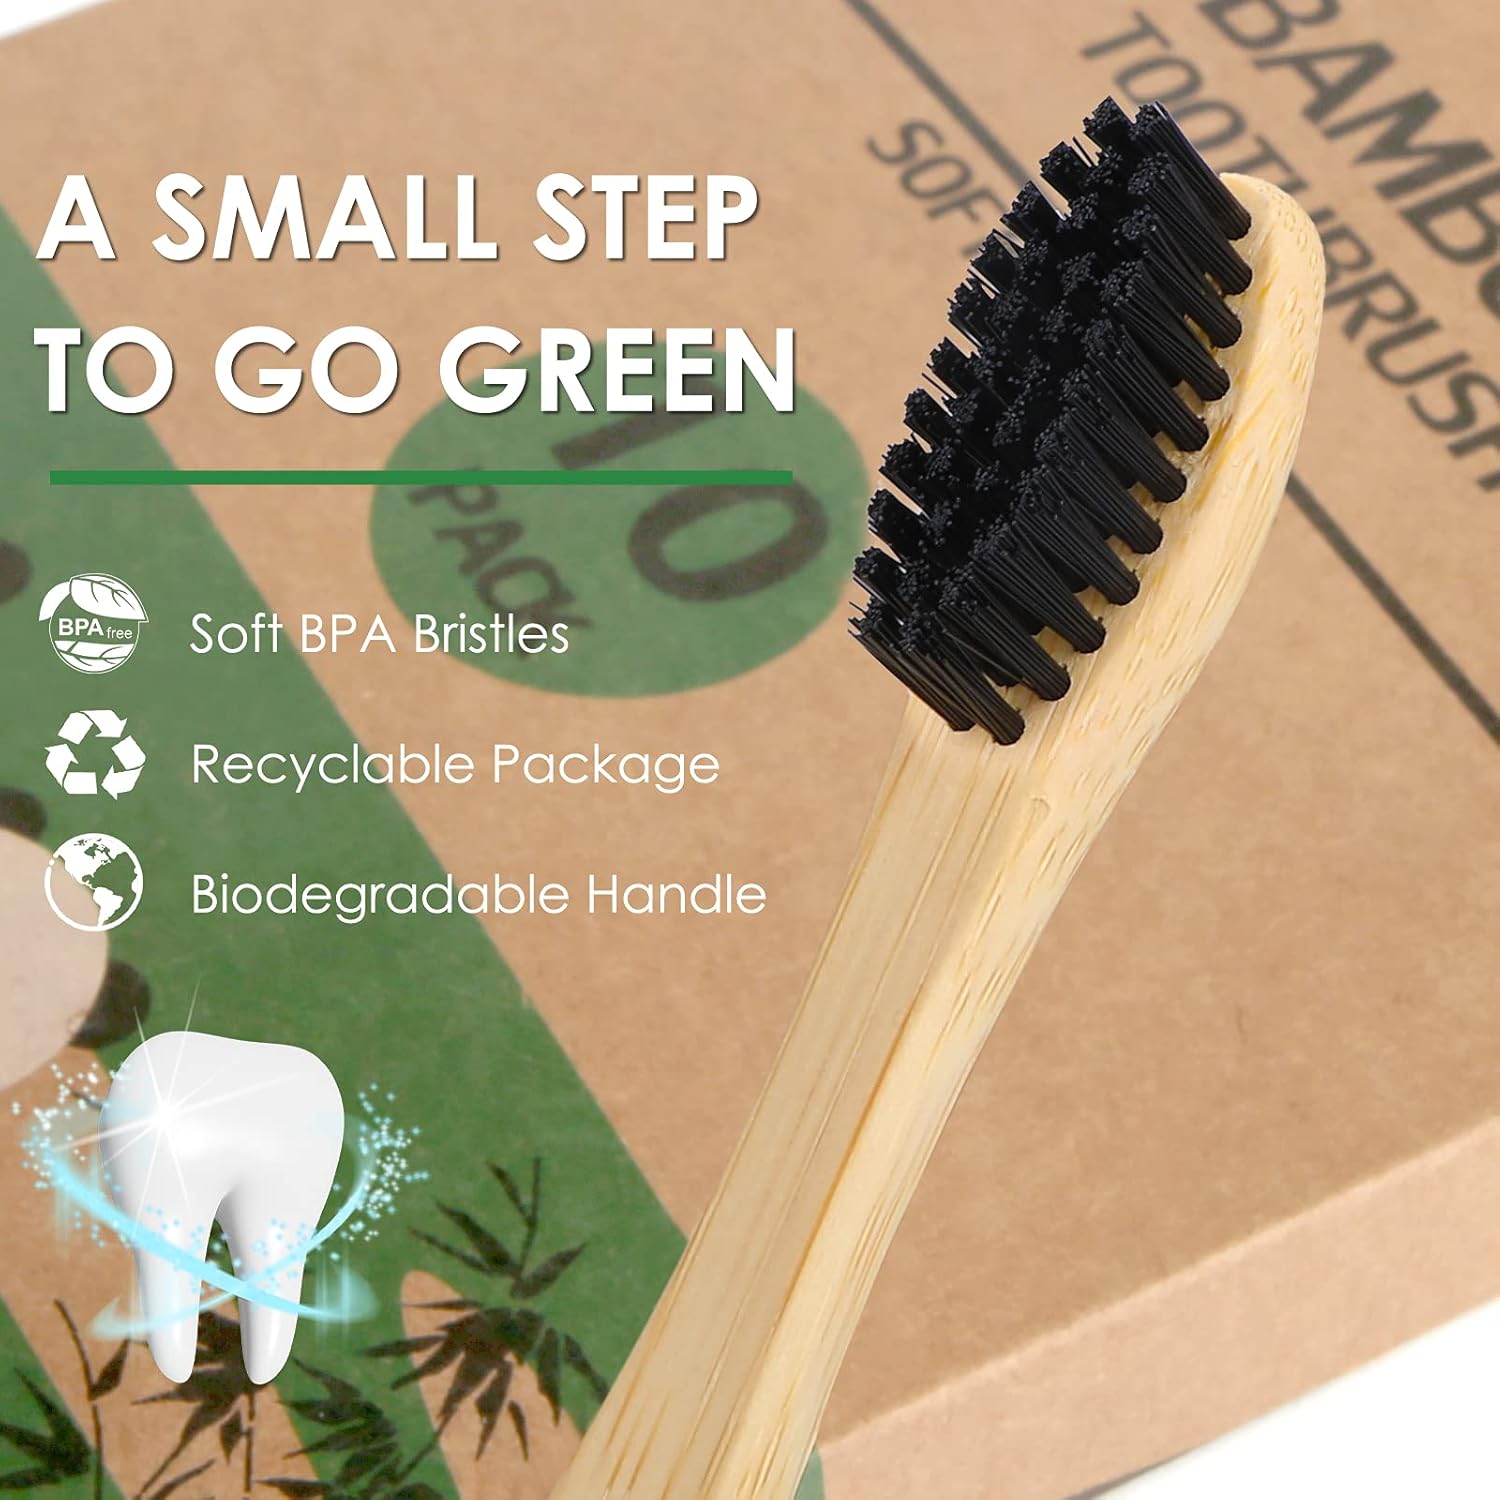 Bamboo Toothbrushes Soft Bristles- 10 Pack Eco-Friendly Toothbrush for Adult, BPA-Free Natural Biodegradable Compostable Charcoal Wooden Tooth Brush